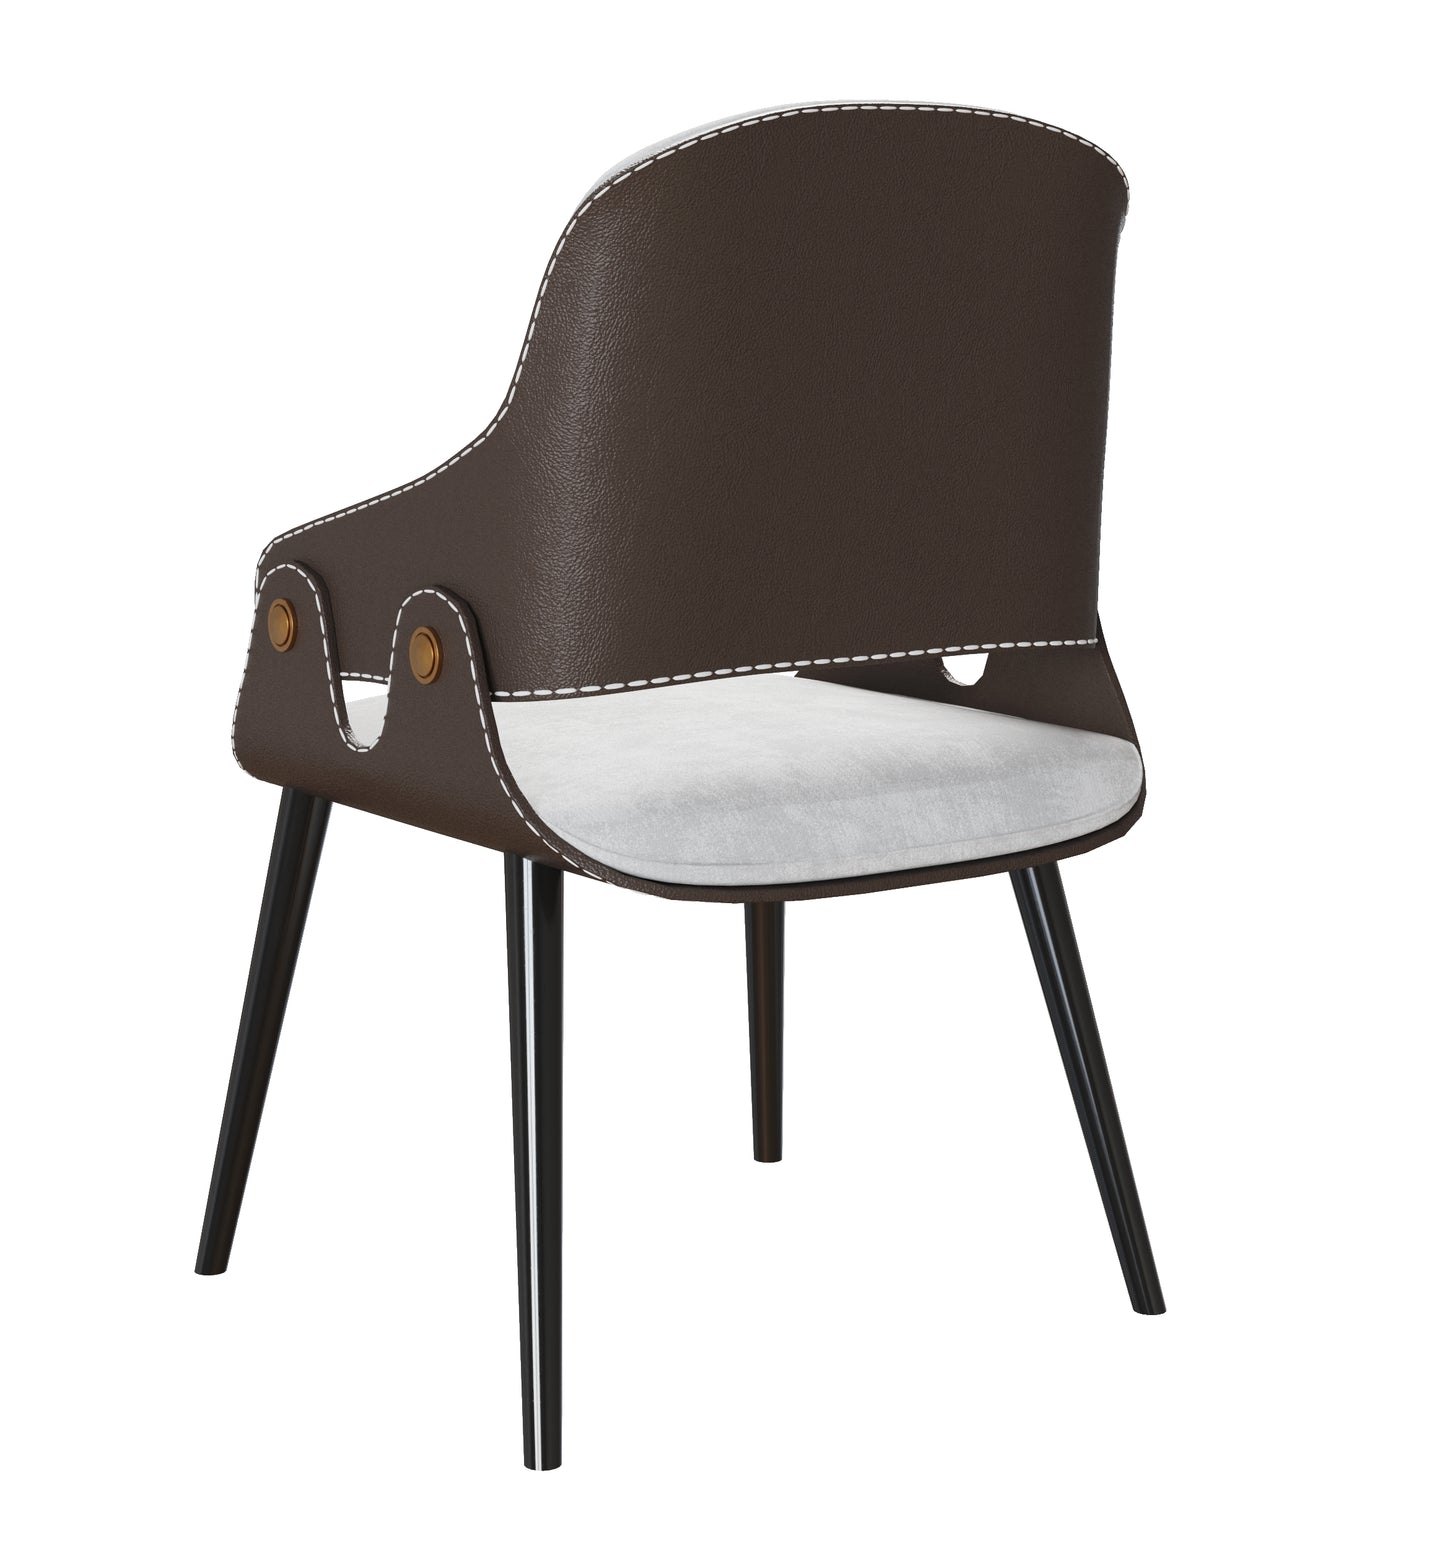 Nordic Artificial Leather Dining Chair